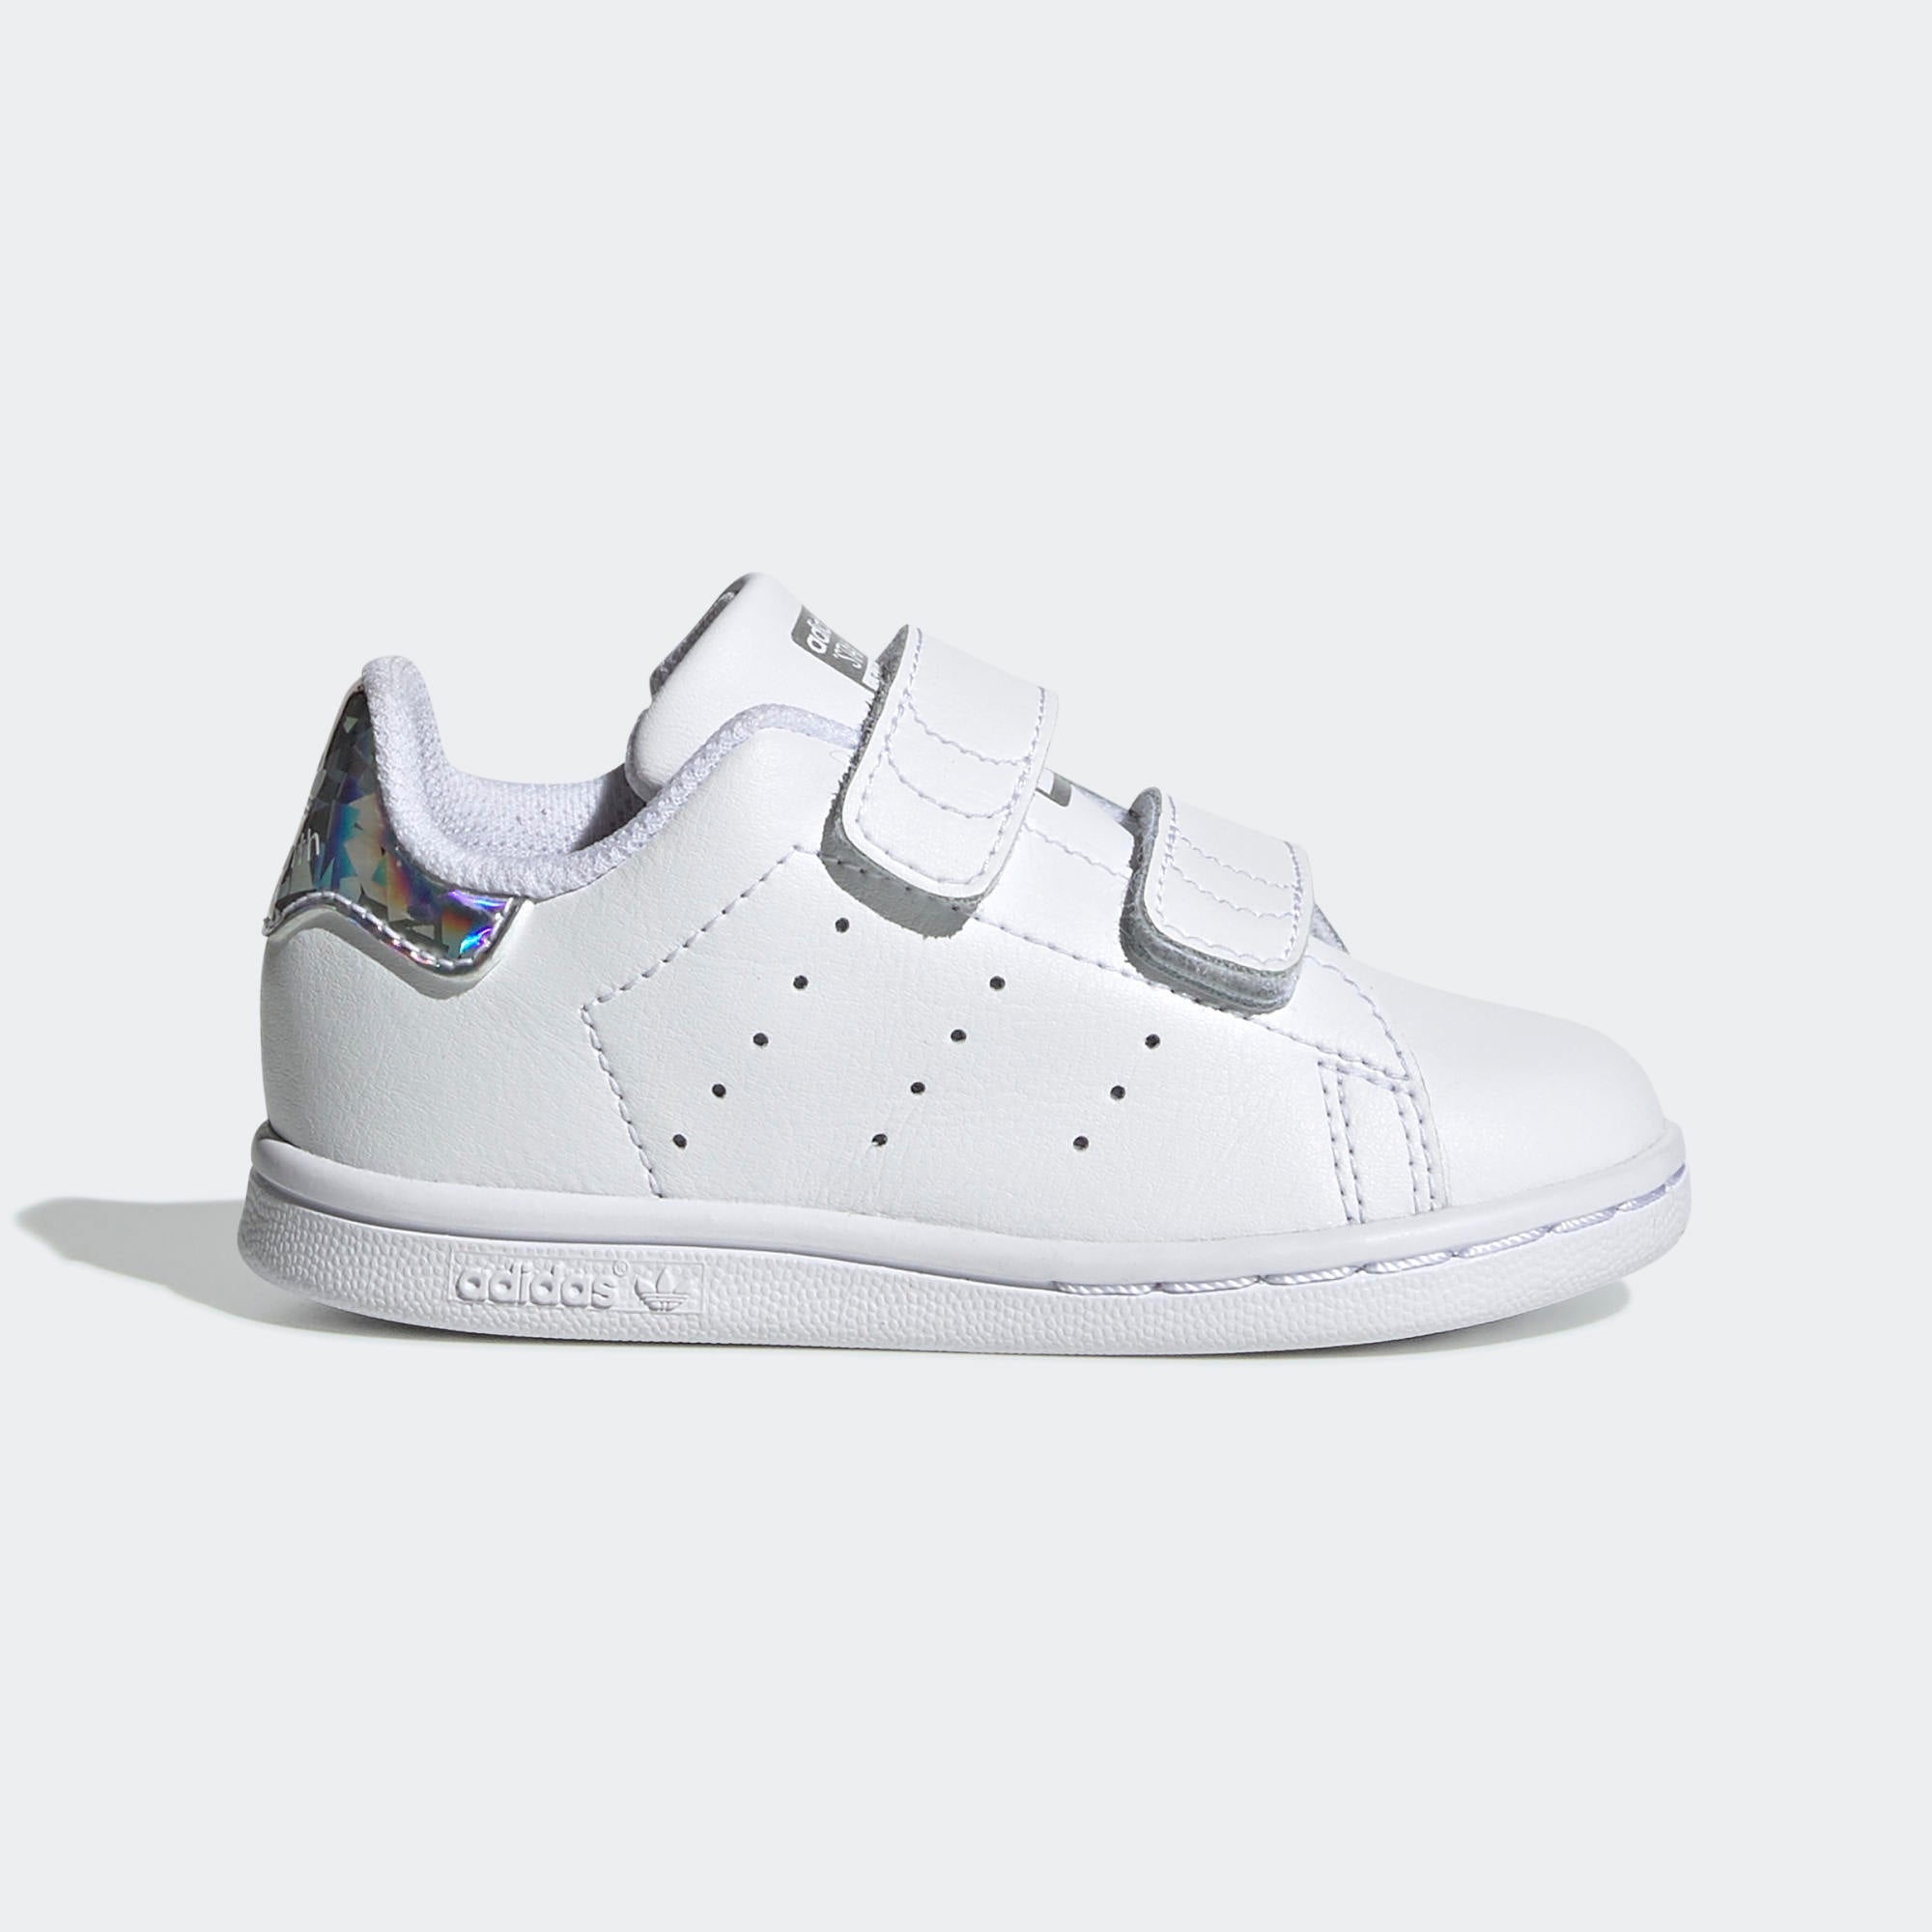 Goodwill aanval Fjord adidas Stan Smith Velcro Shoes White Iridescent | Chicago City Sports